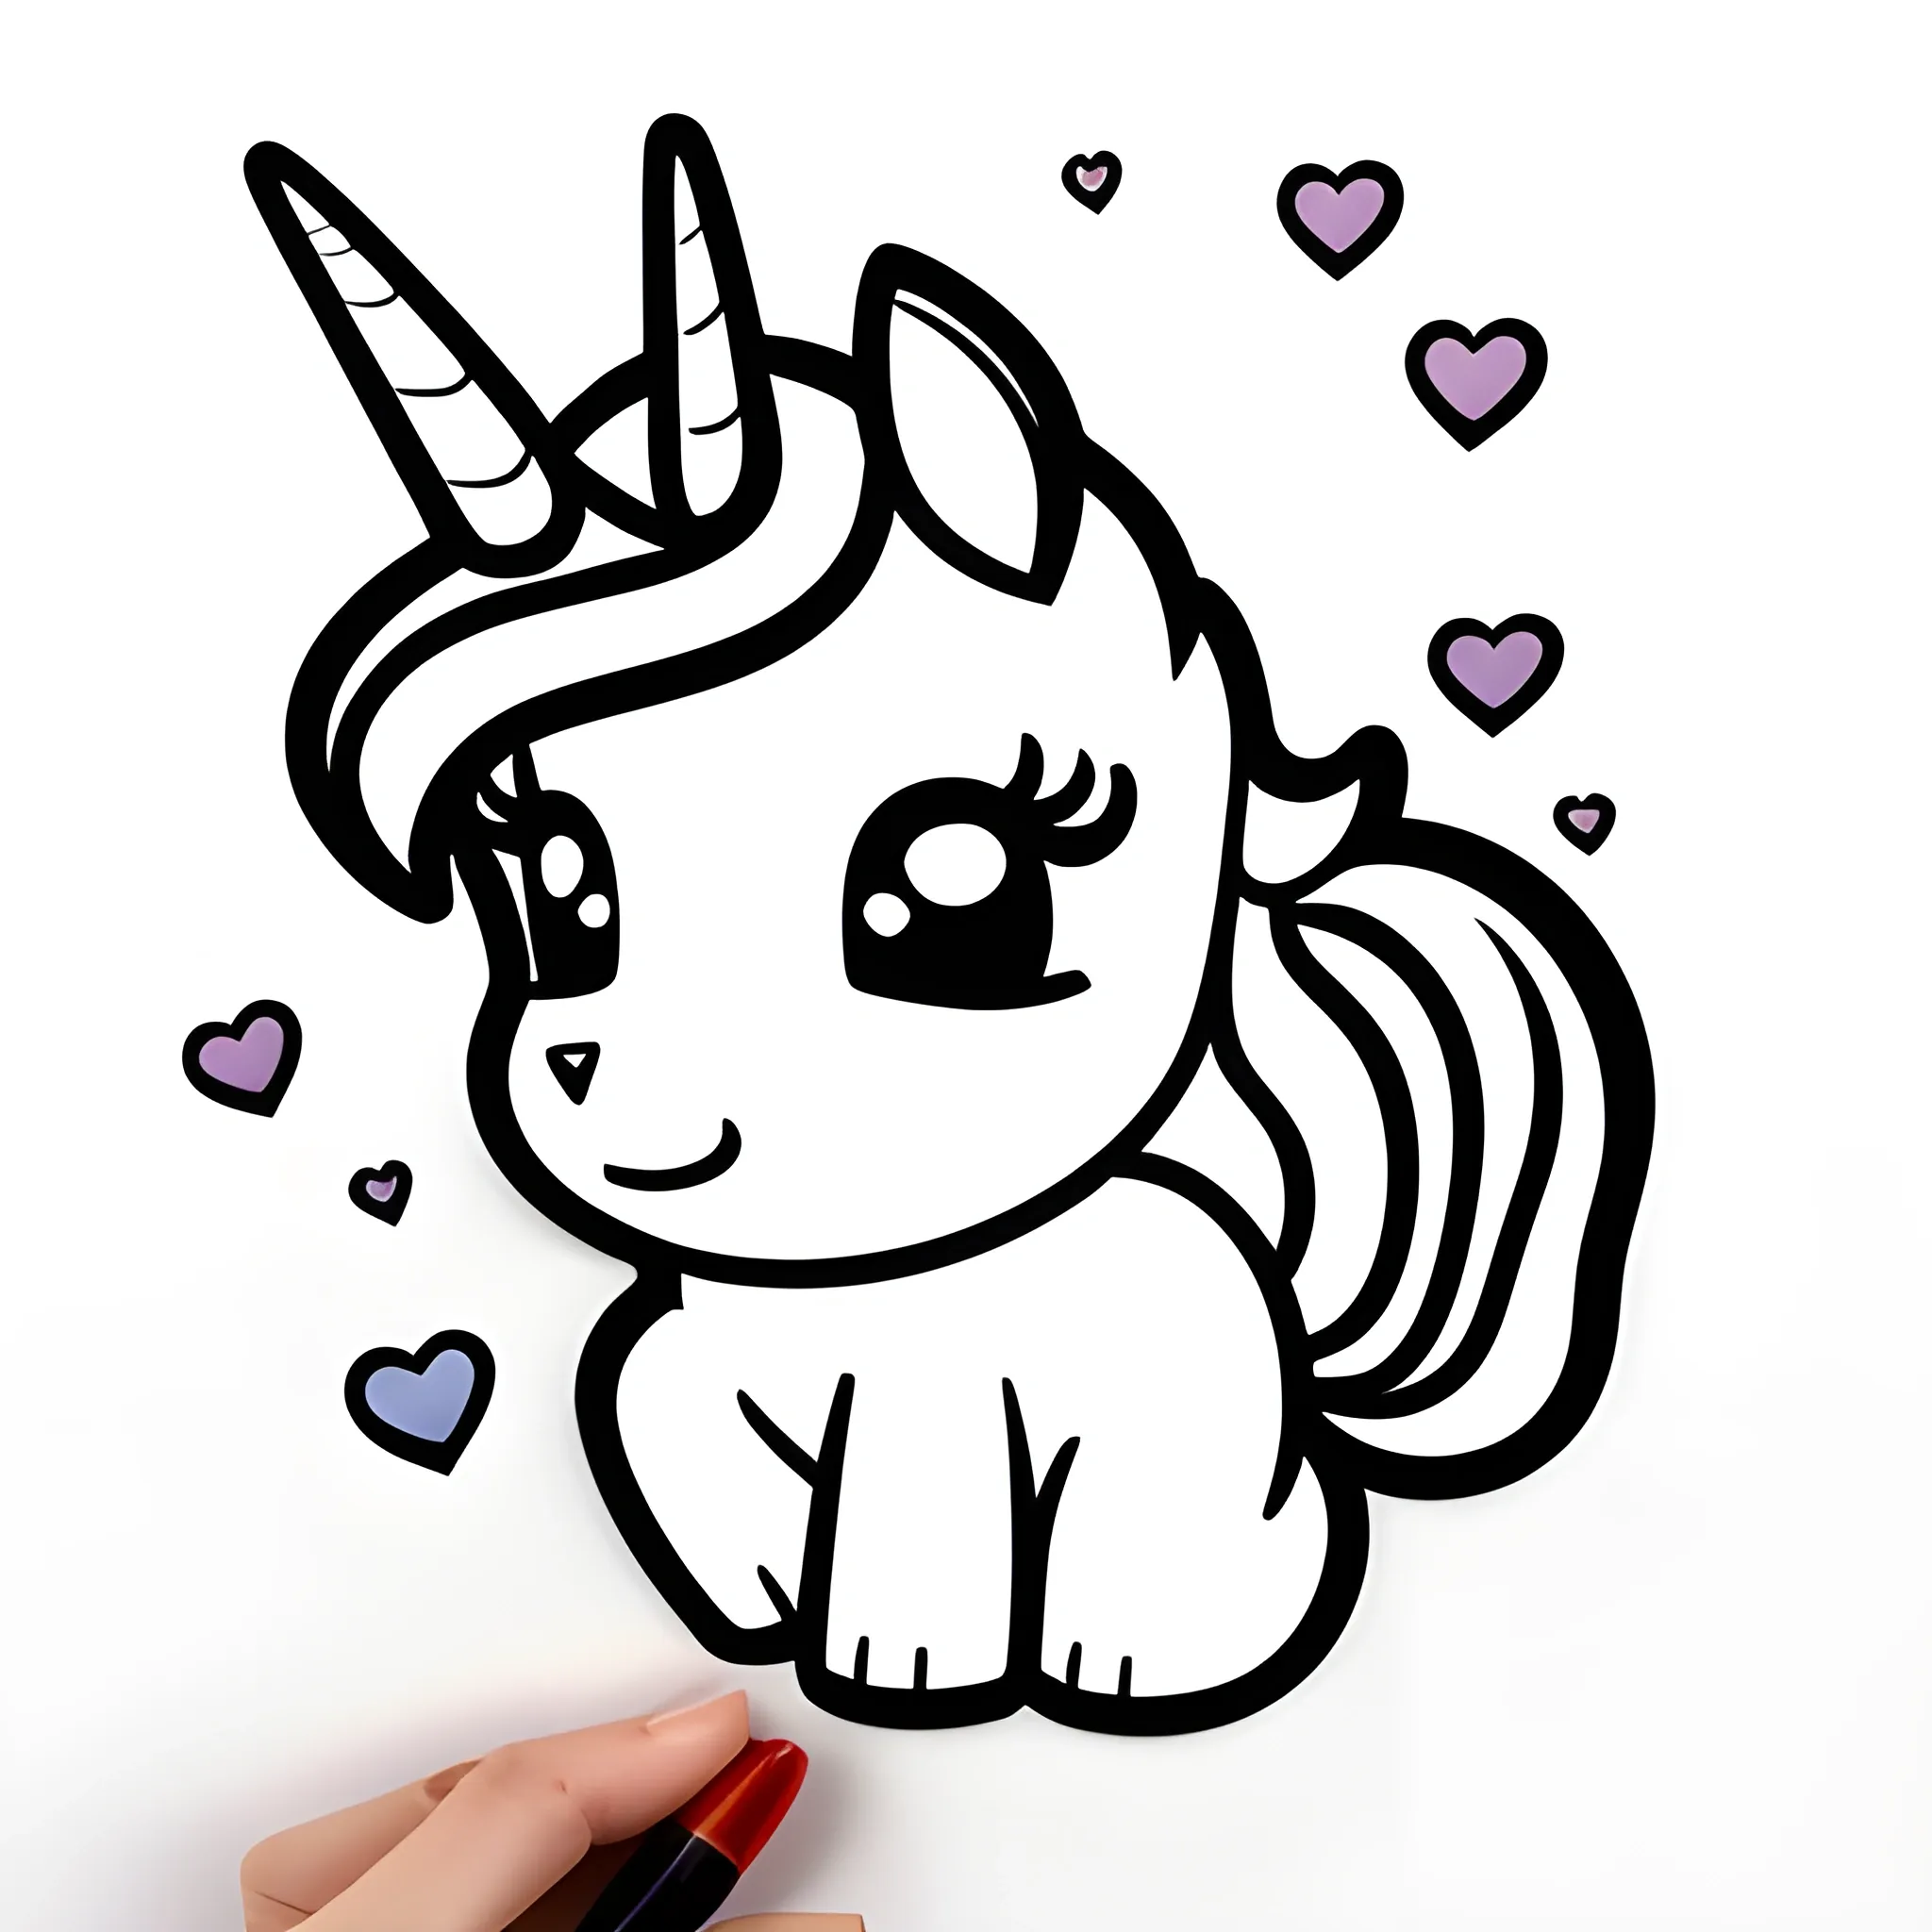 Discover 206+ easy sketch of unicorn latest